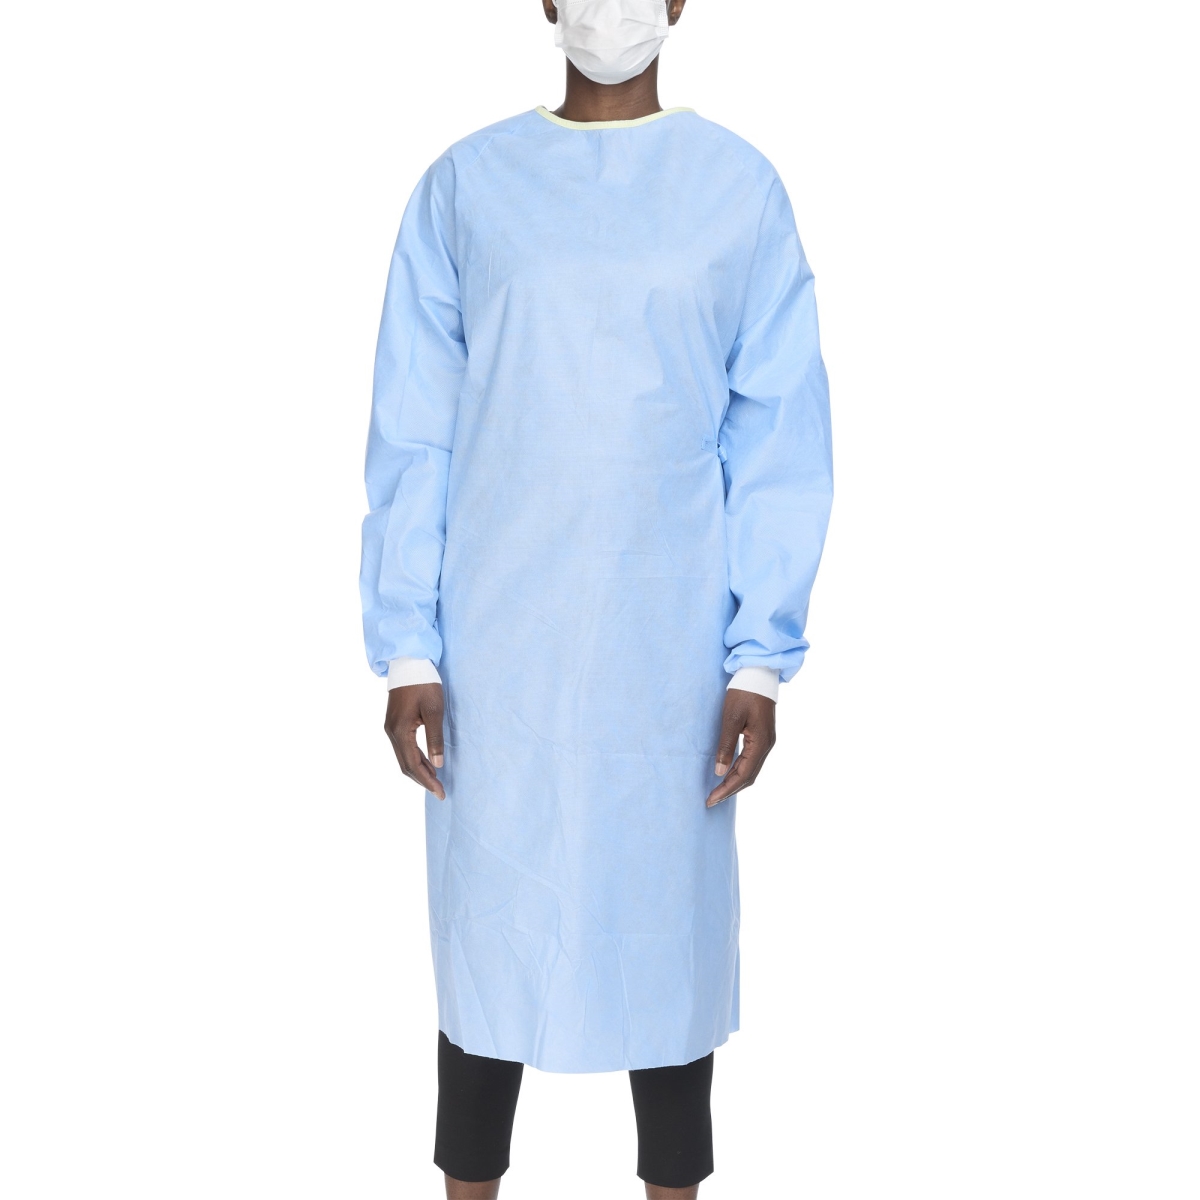 167990-CS Evolution 4 Non-Reinforced Surgical Gown - Large - Pack of 36 -  O&M Halyard, 167990_CS